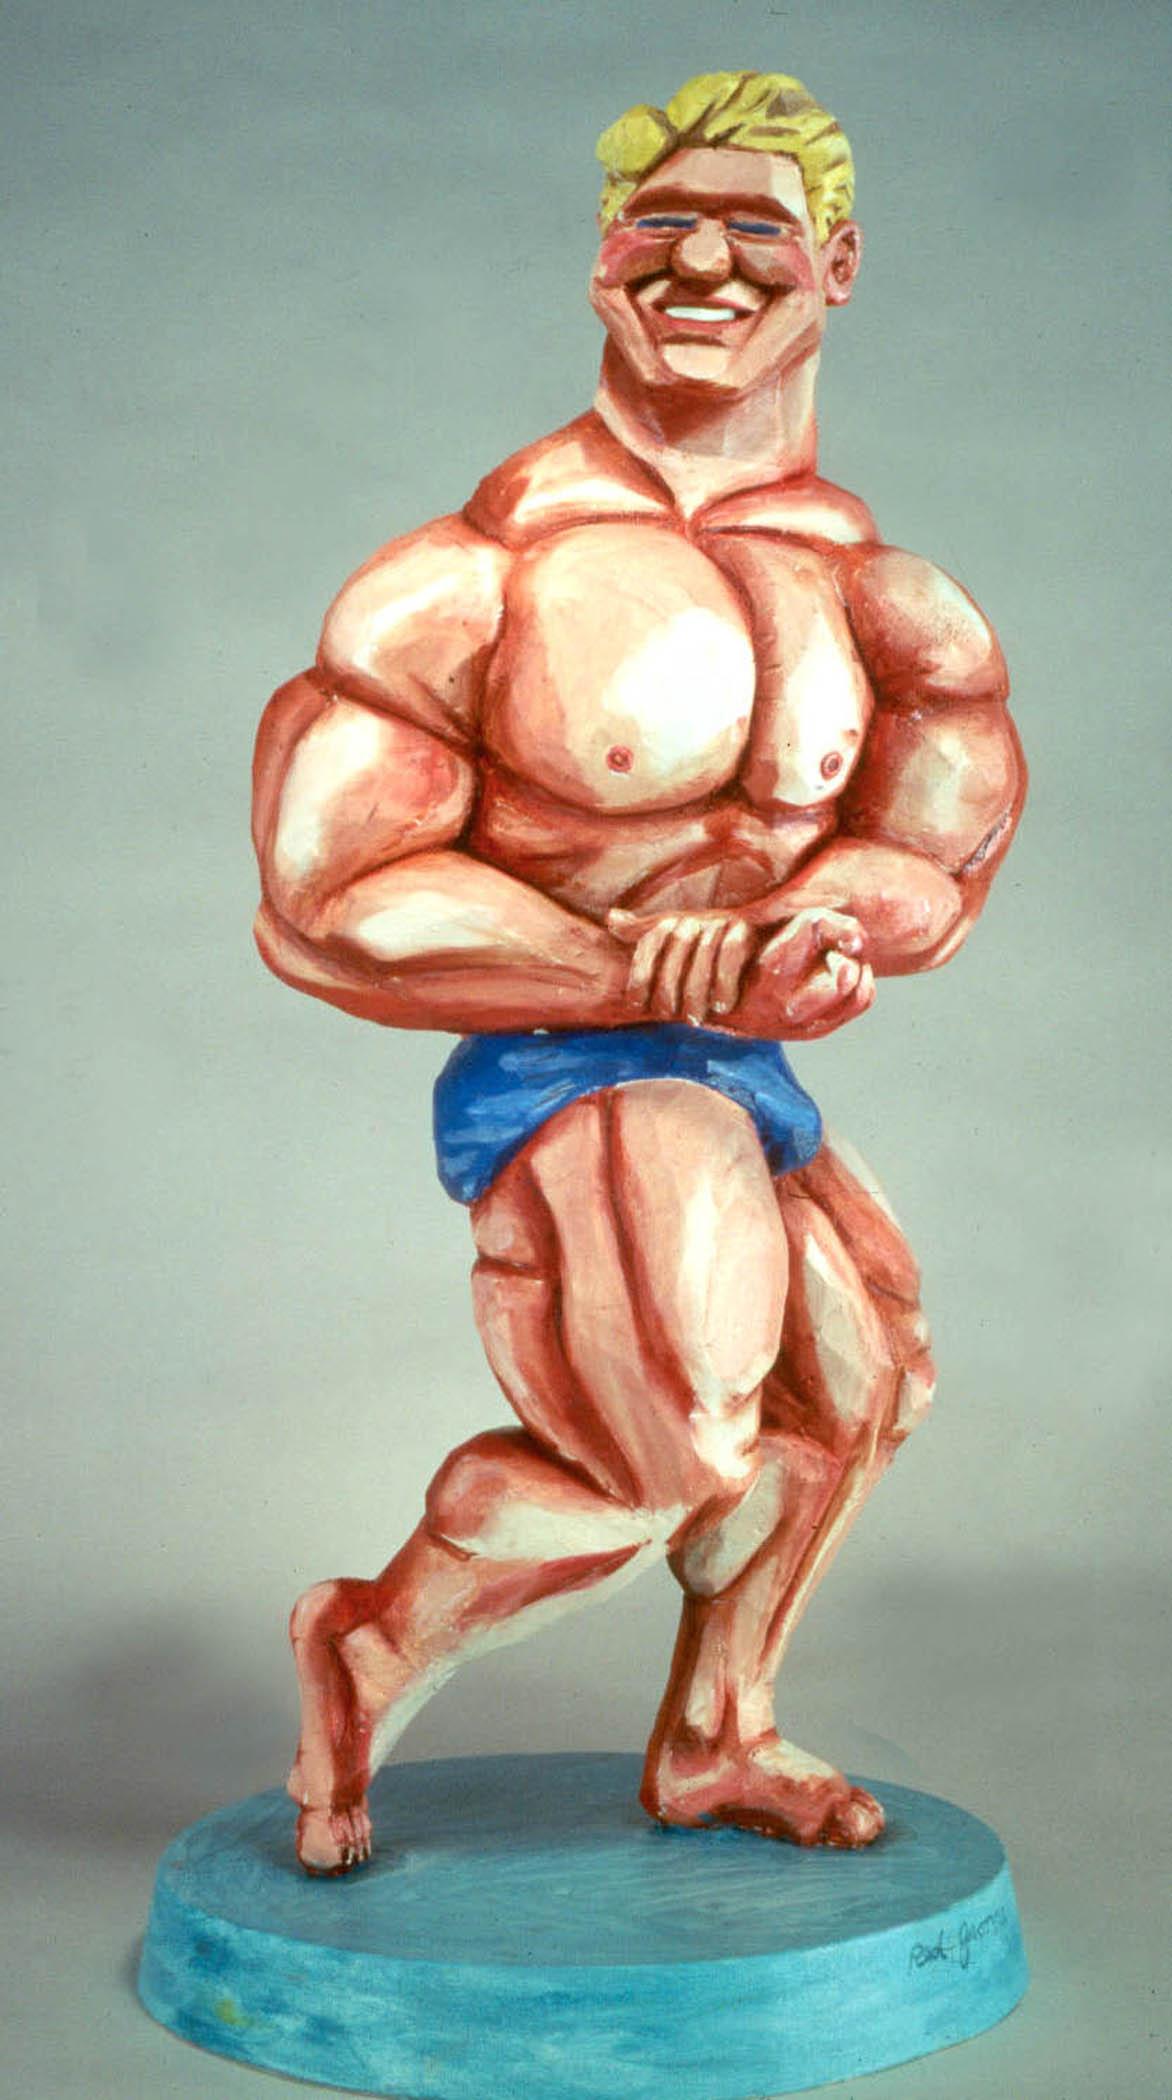 Mr. Universe - Sculpture by Red Grooms